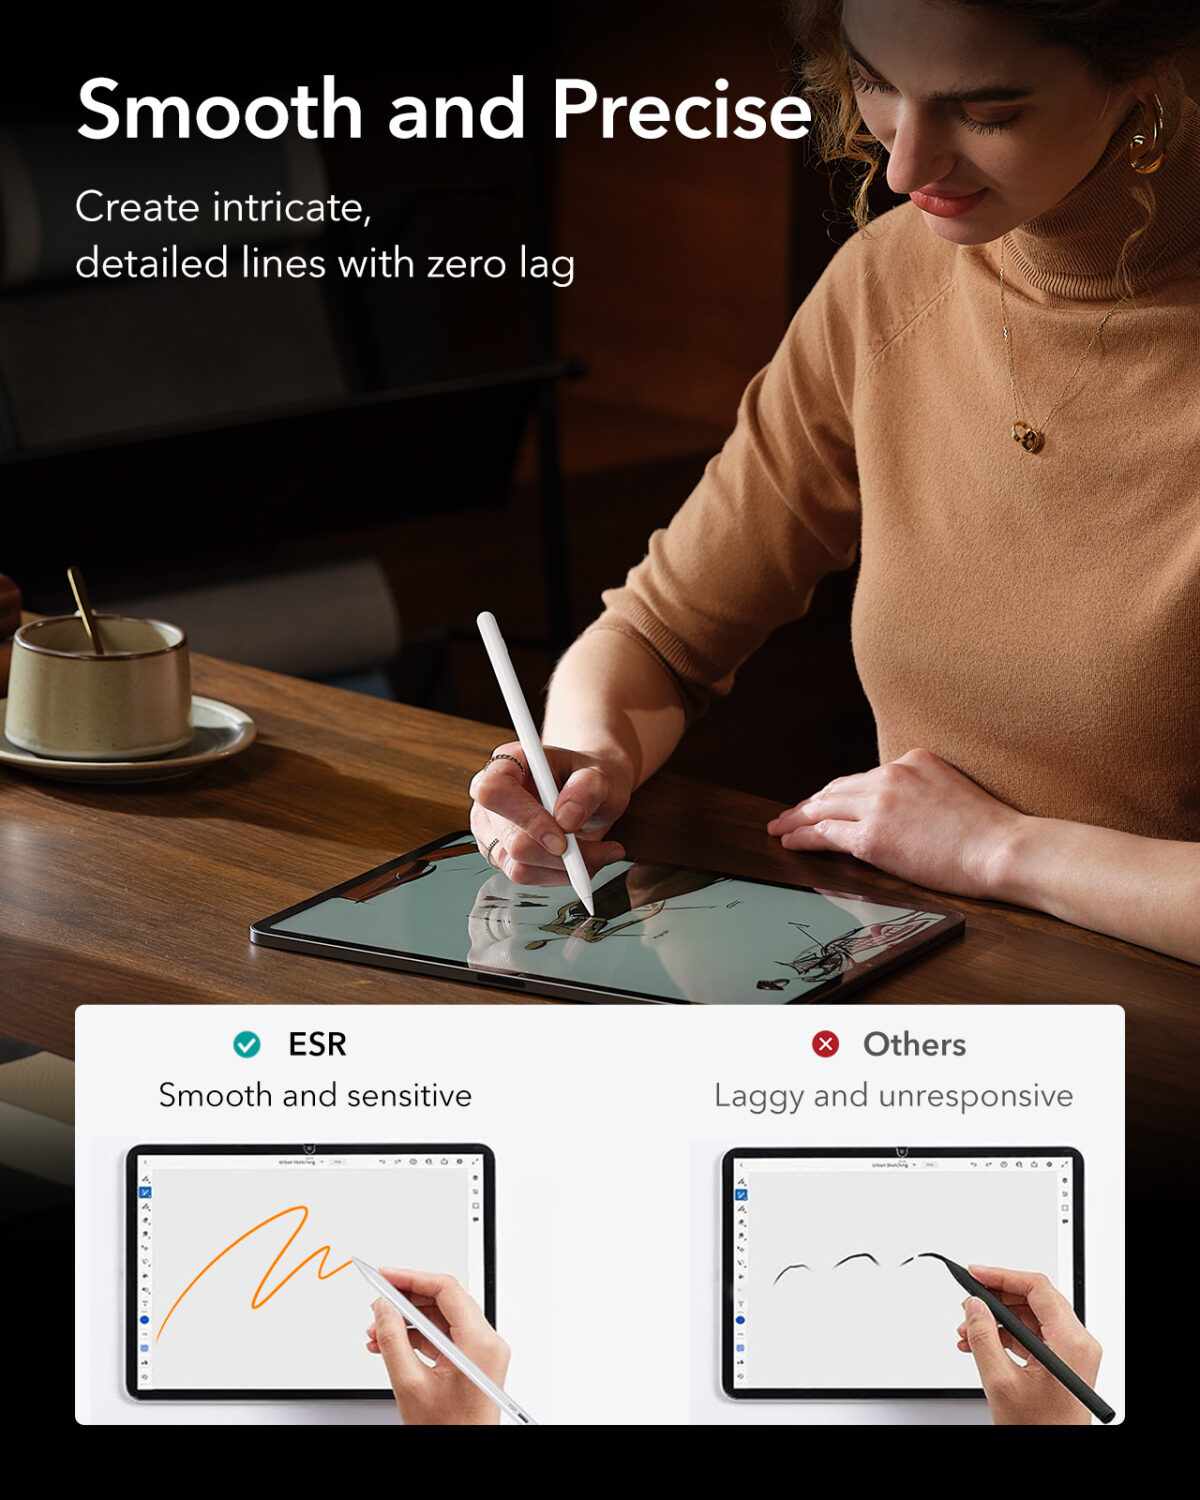 ESR Digital Pencil Pro providing precise and smooth writing and drawing experience on iPad.